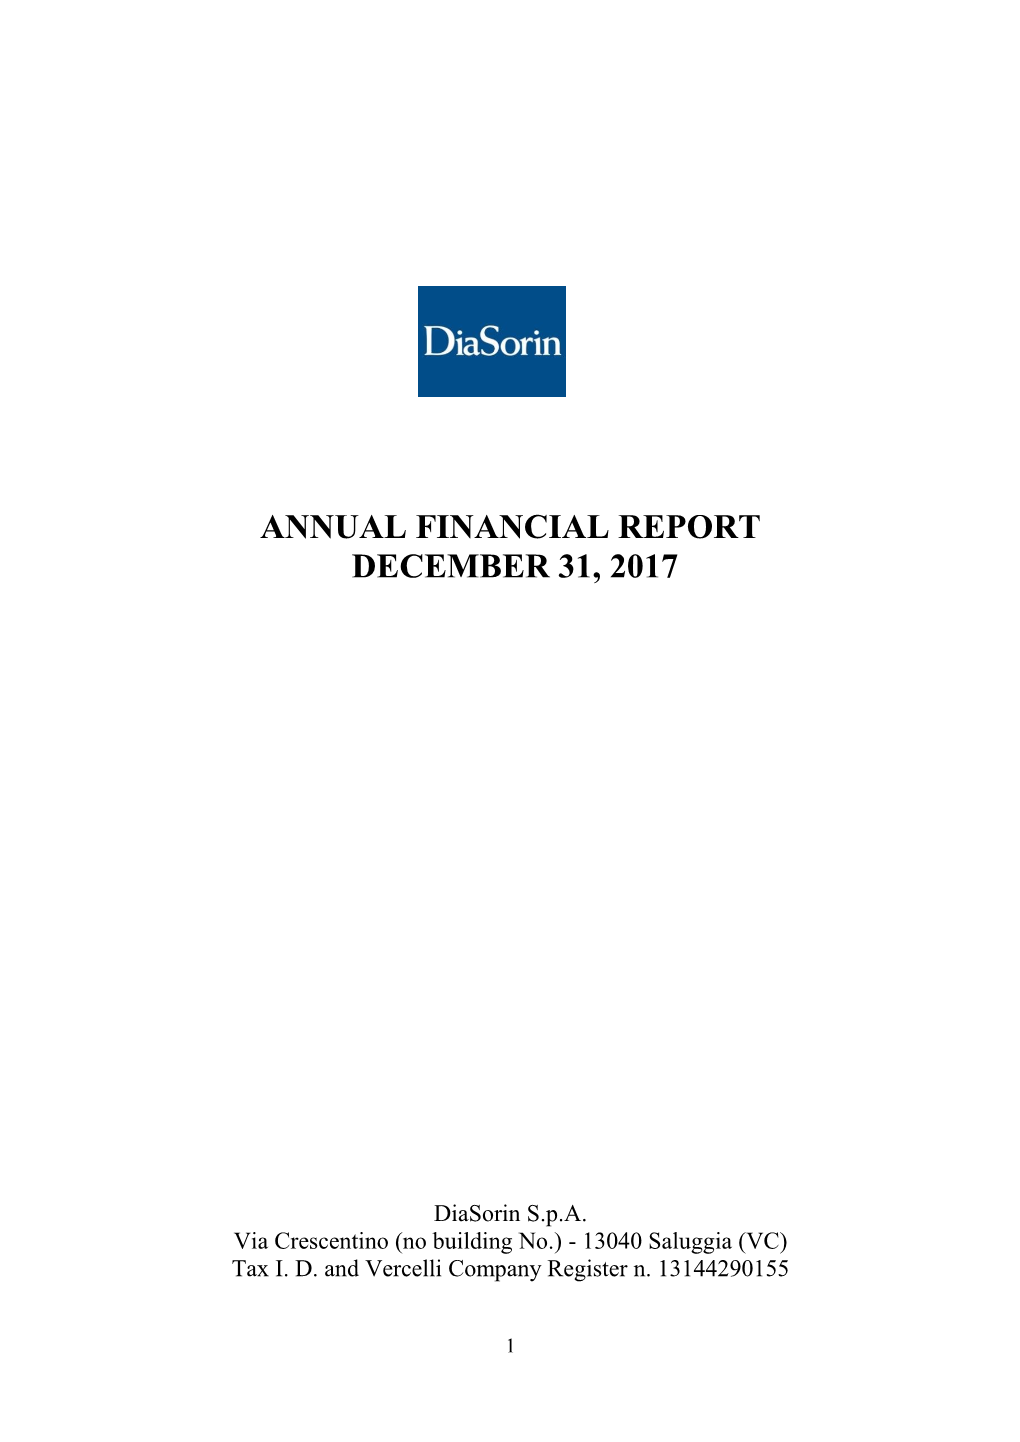 Annual Financial Report December 31, 2017